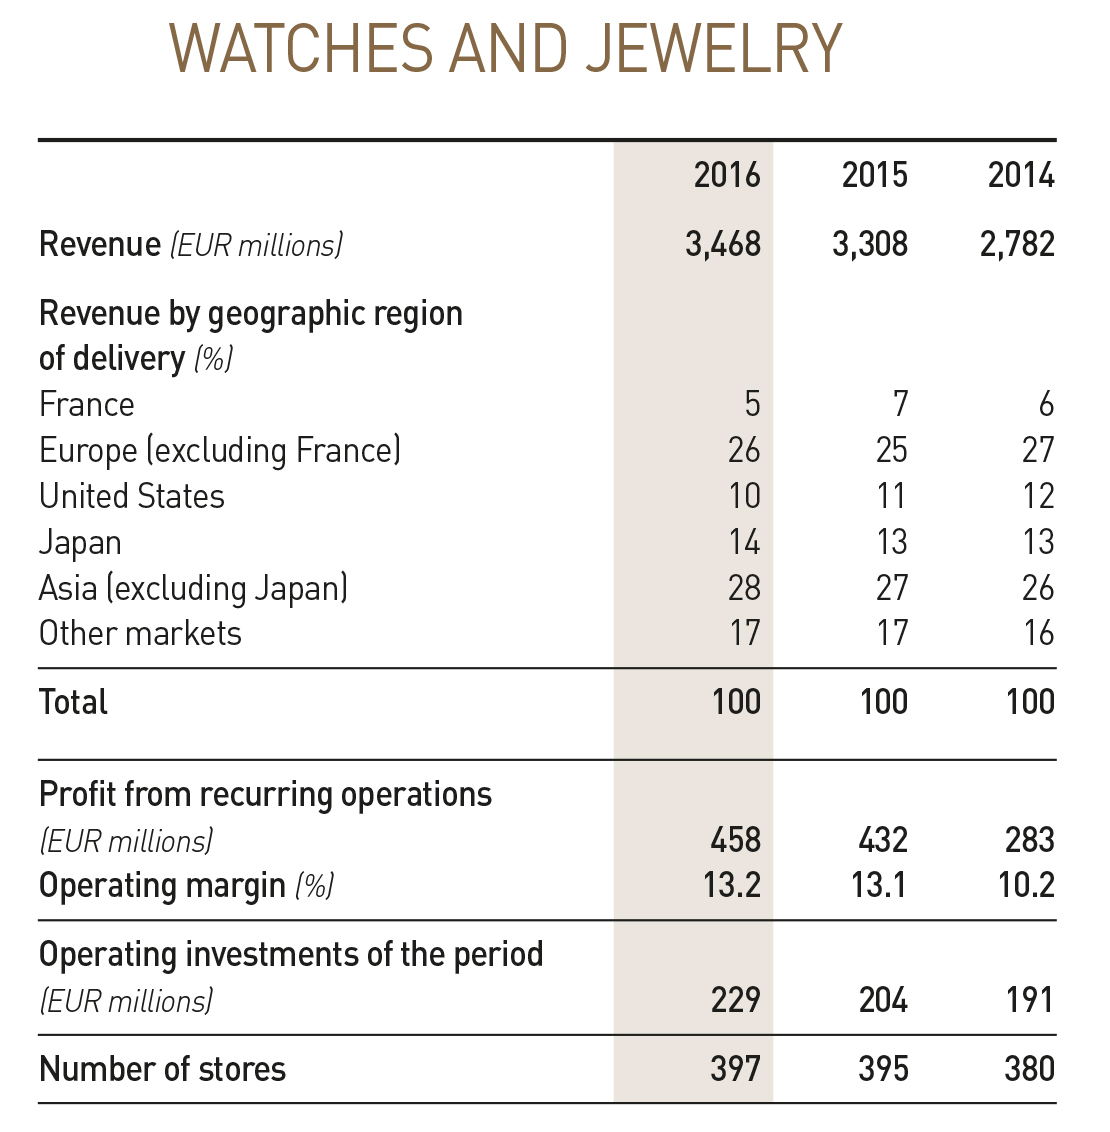 Watch, Jewelry Sales Up 5% for LVMH in 2016